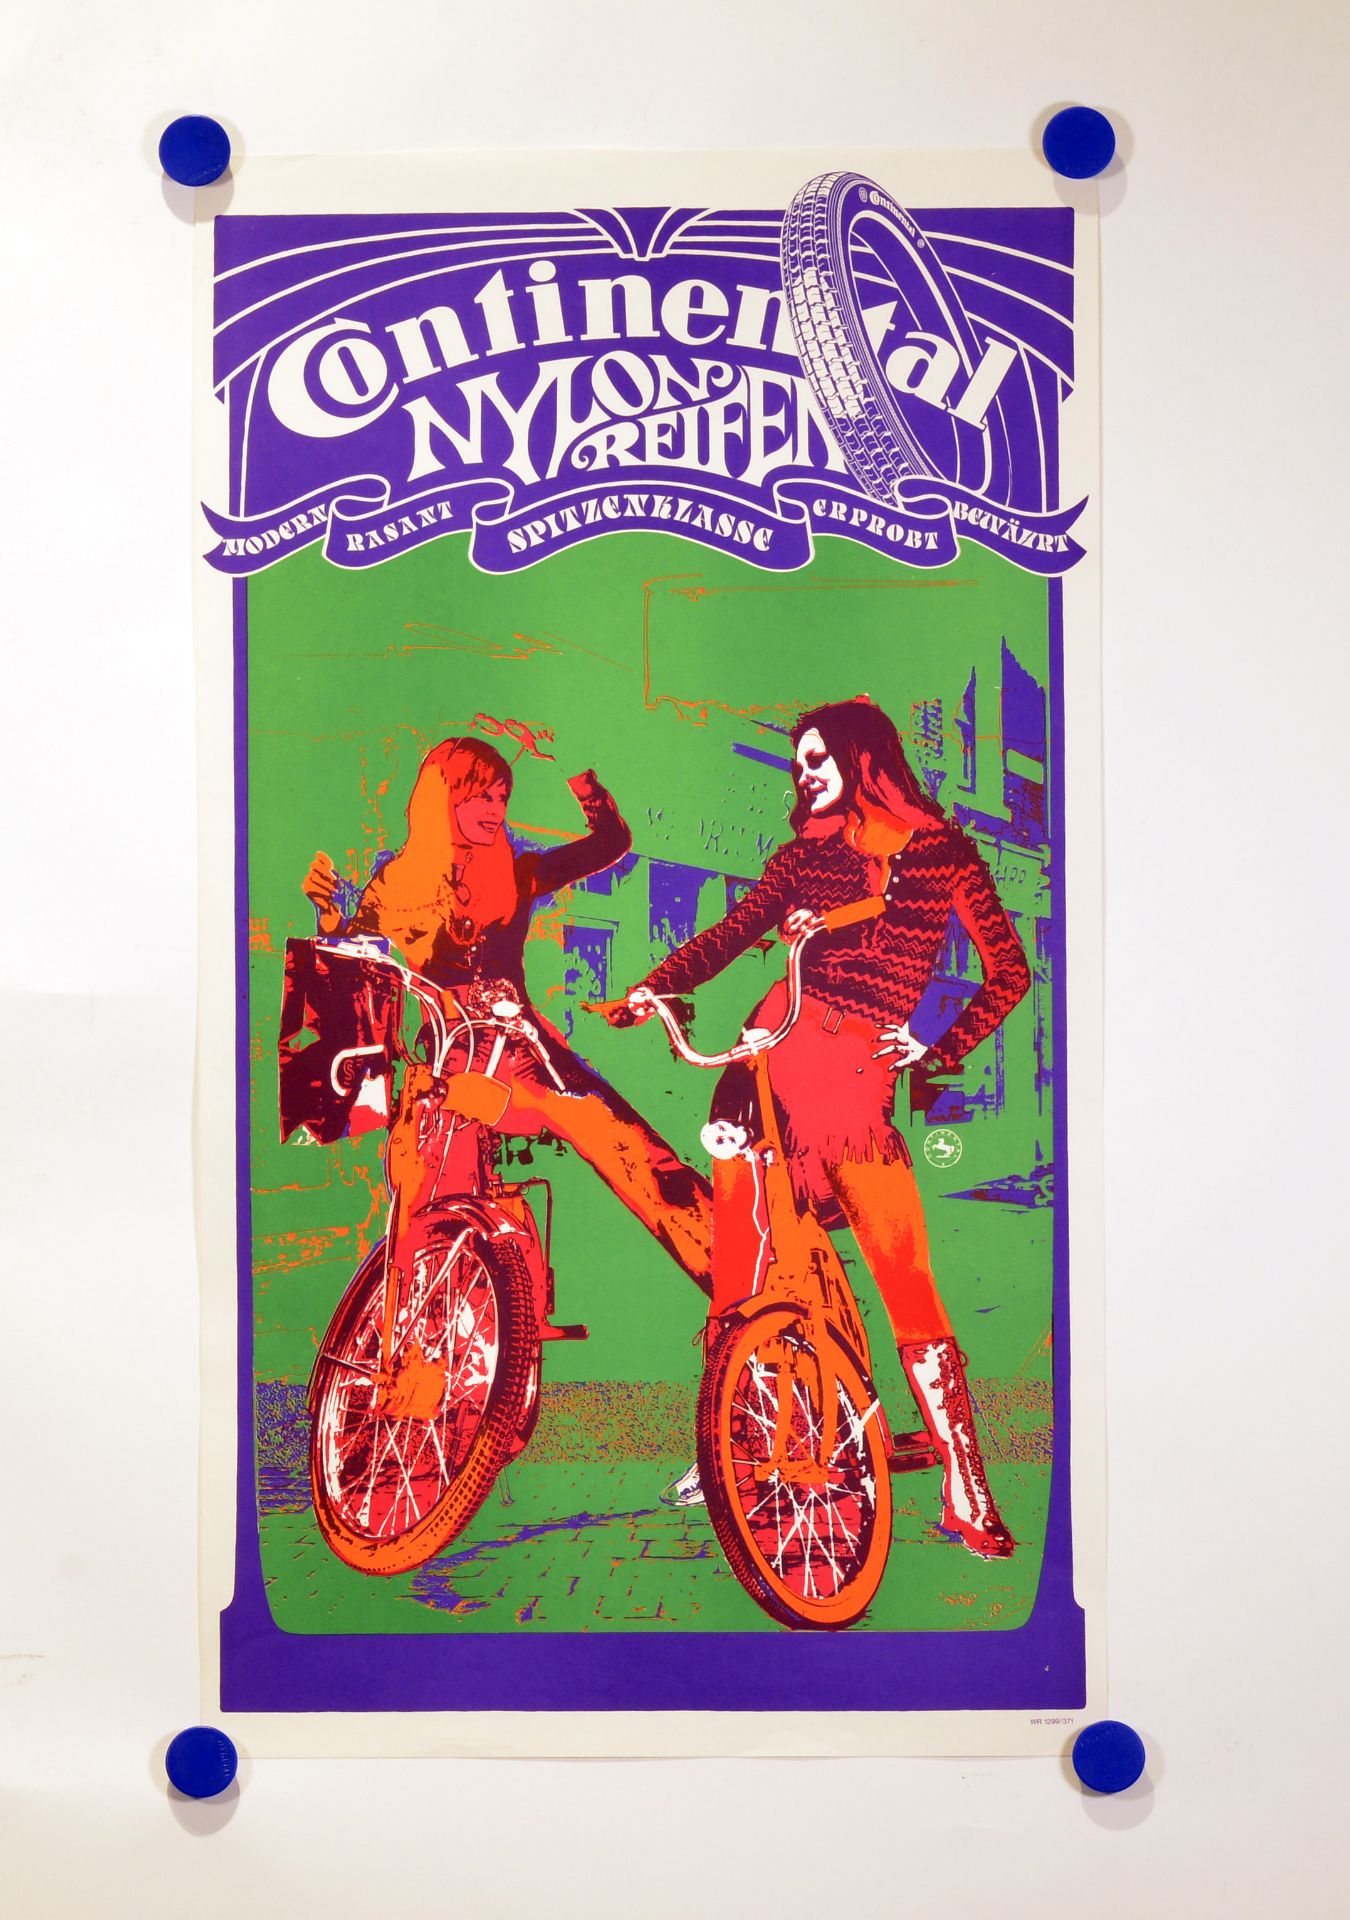 2 posters, Continental, psychedelic posters, 1970s, typical style of this time, 47.5 x 83.5 cm - Image 2 of 2